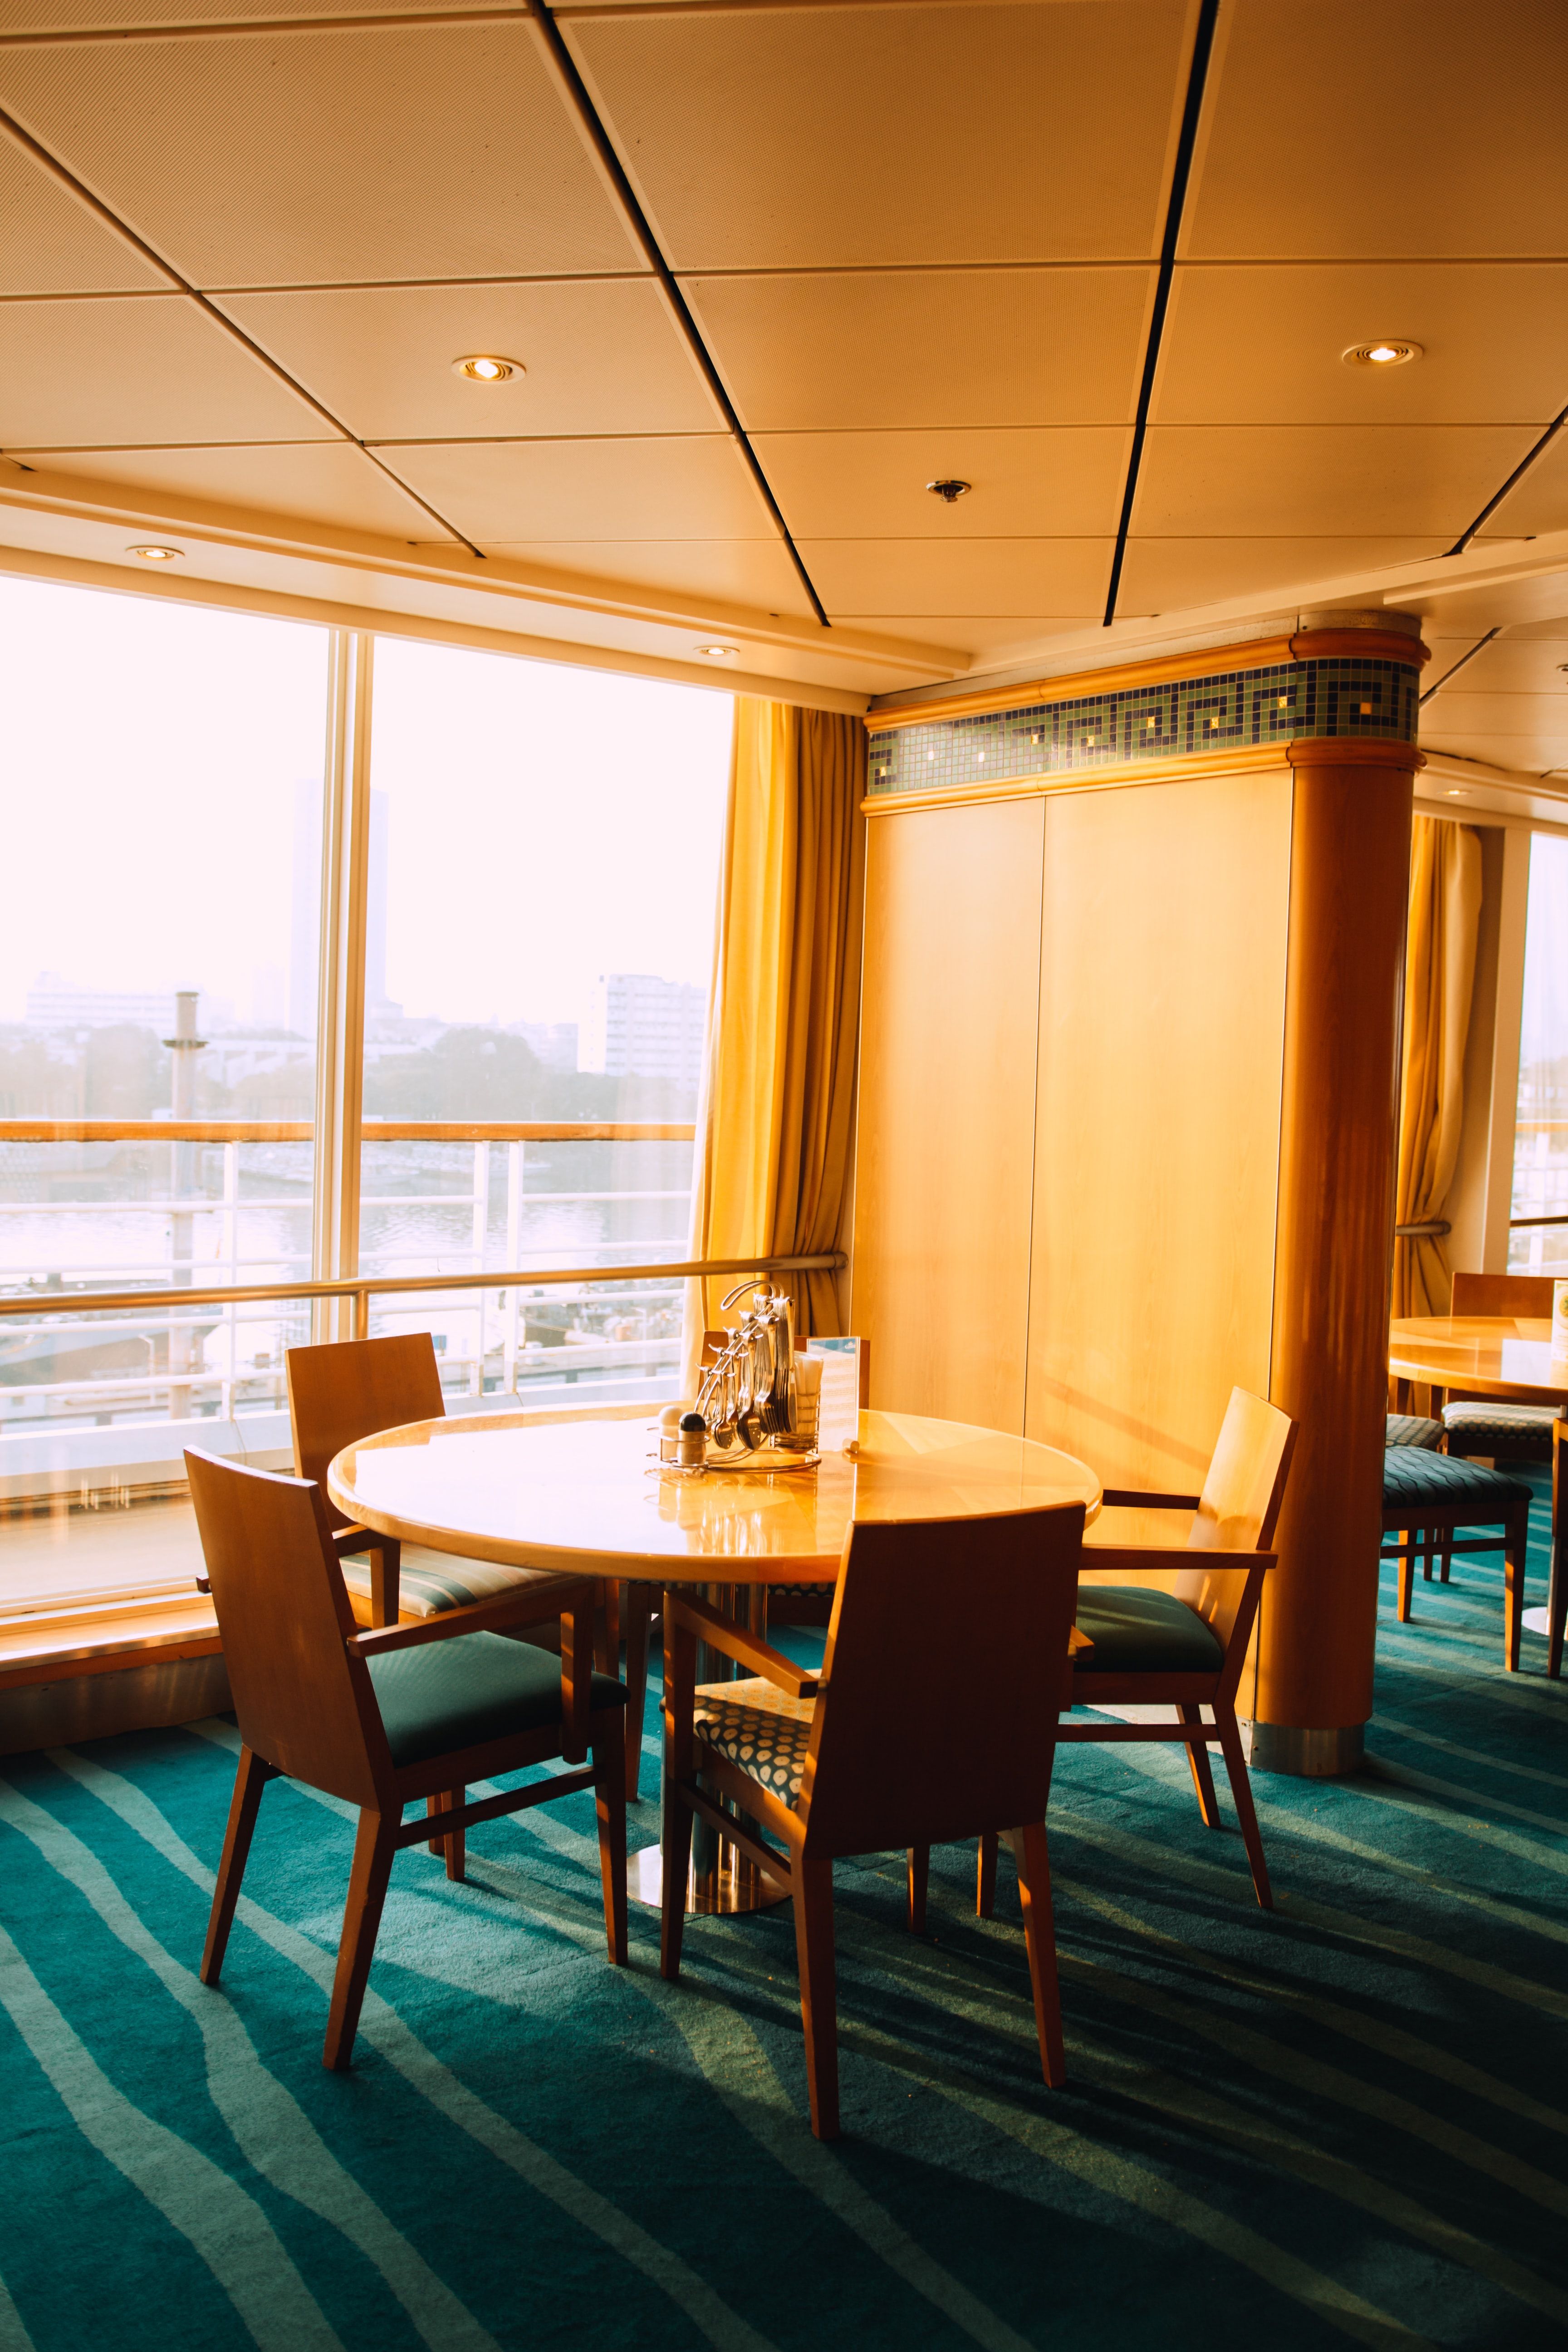 Photo of dining table in dining room on a cruise ship.